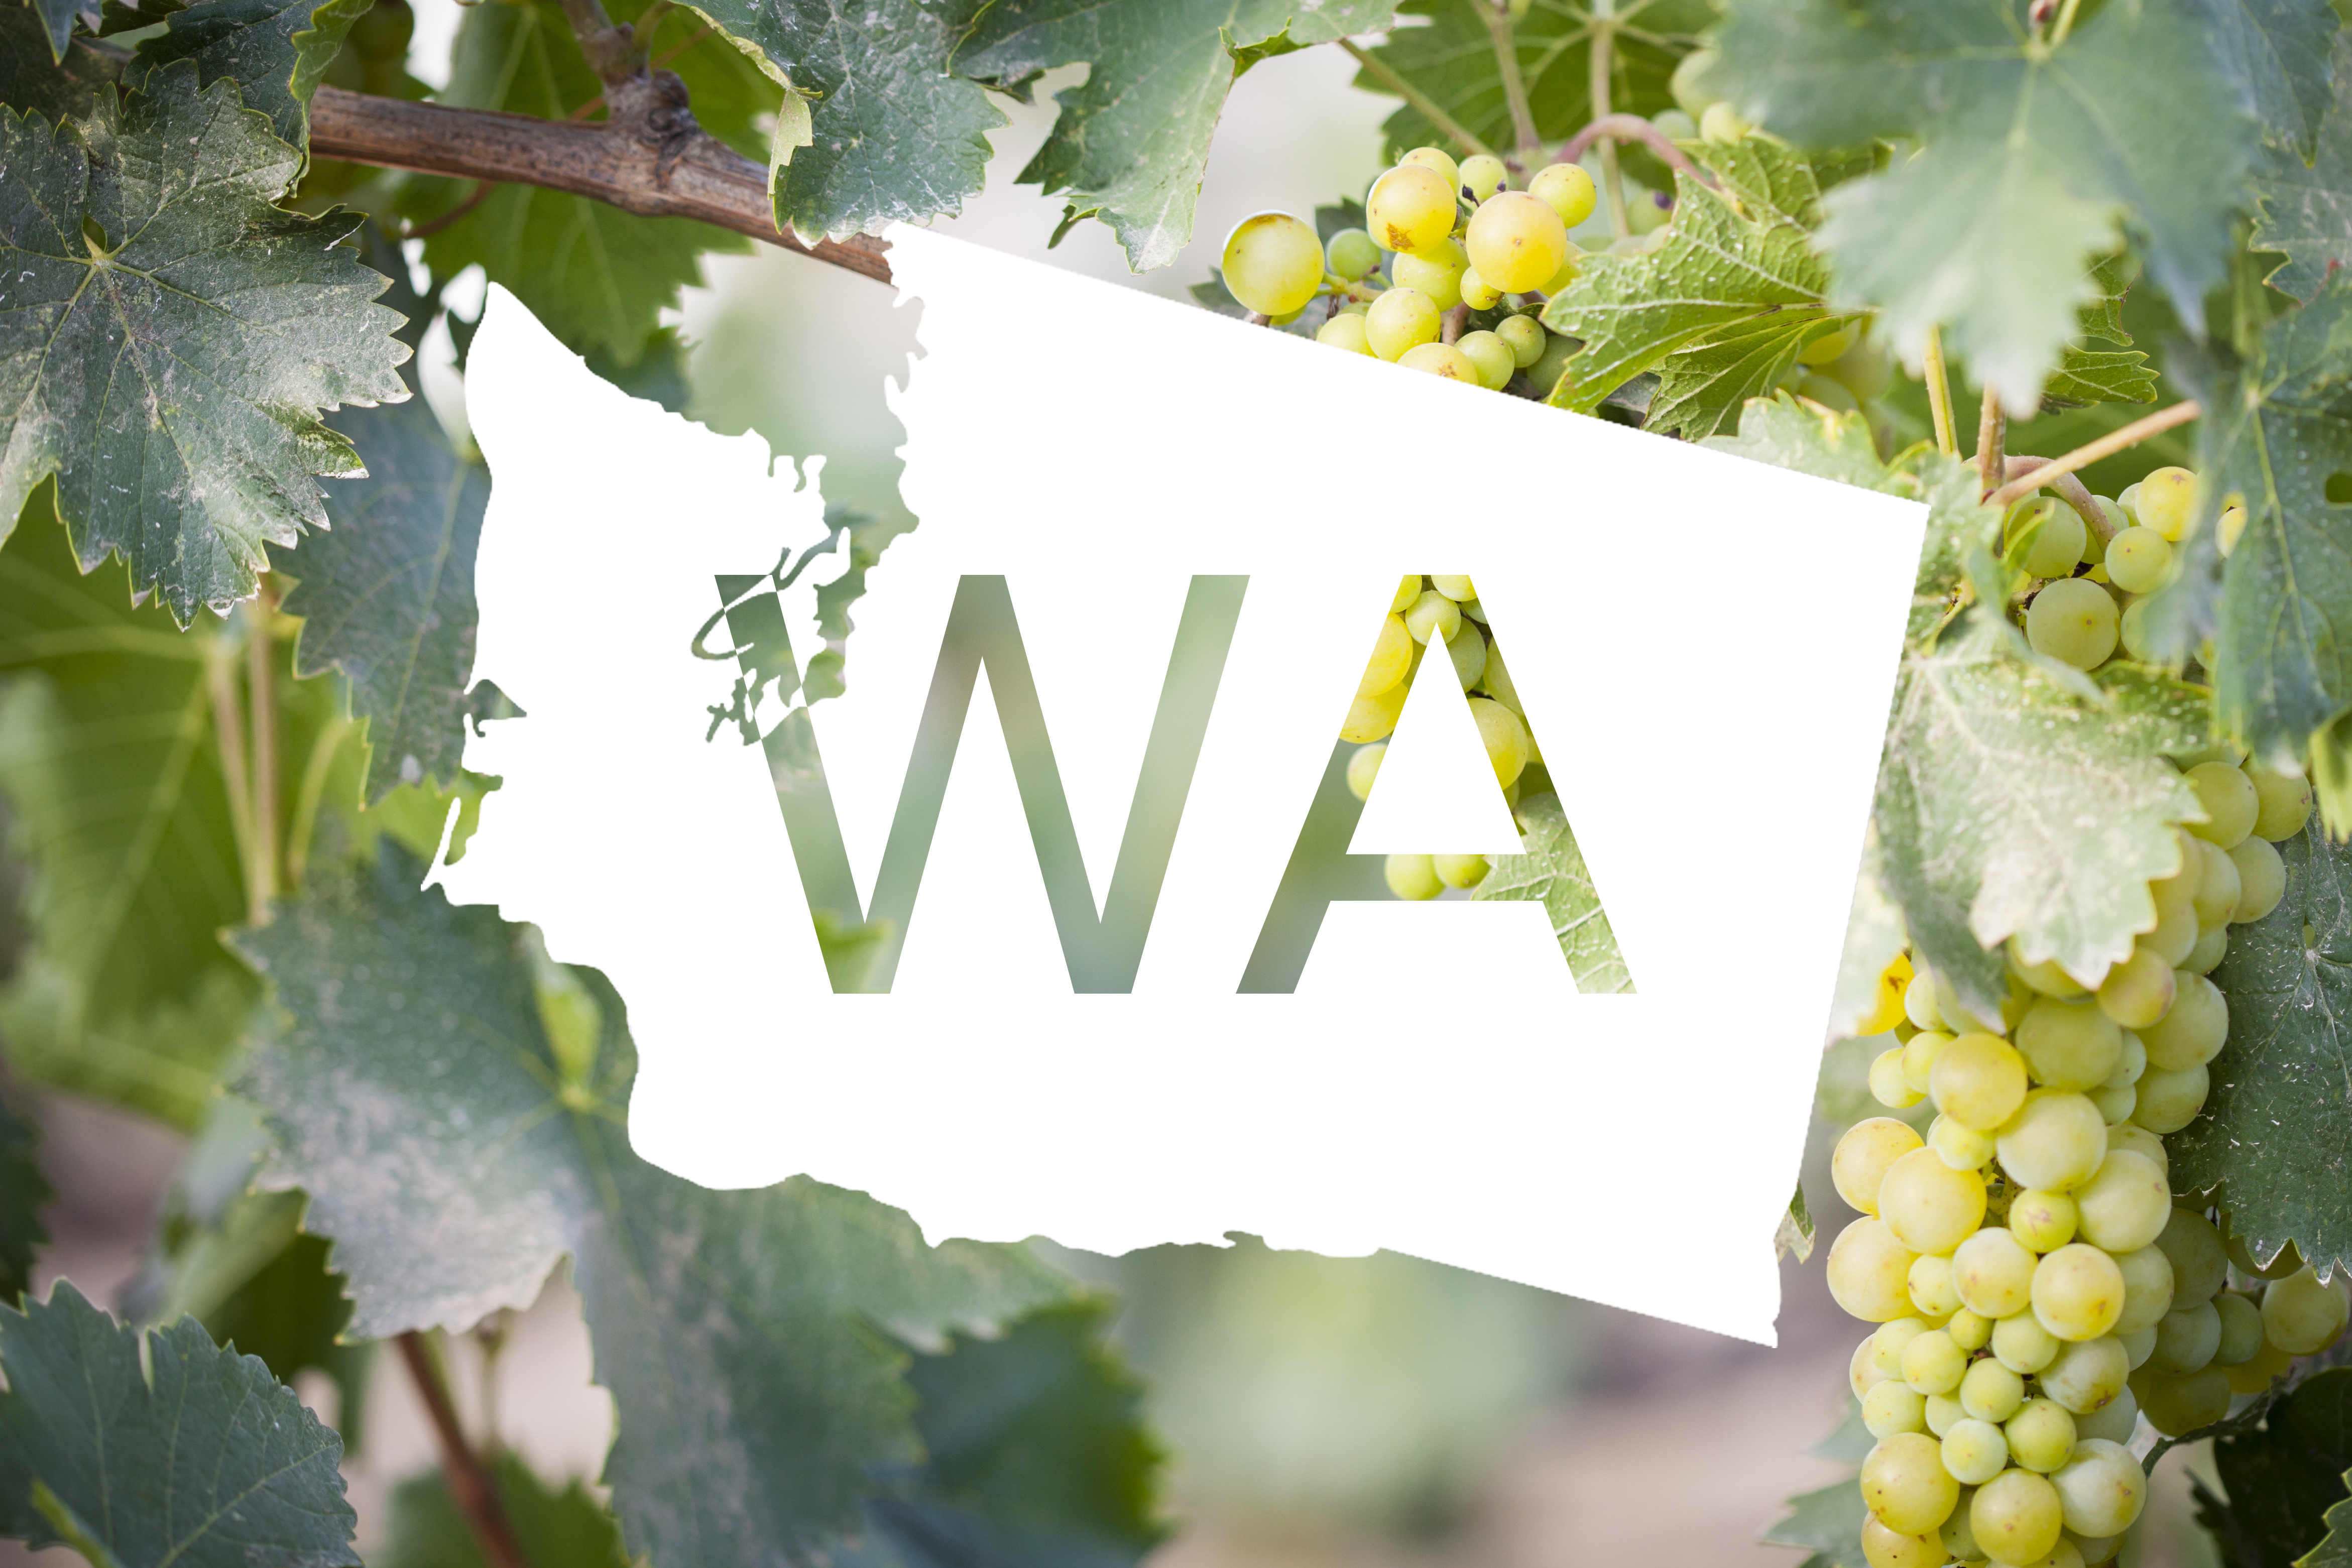 Silhouette of Washington State with "WA" on it, overlaid on top of an image of wine grapes